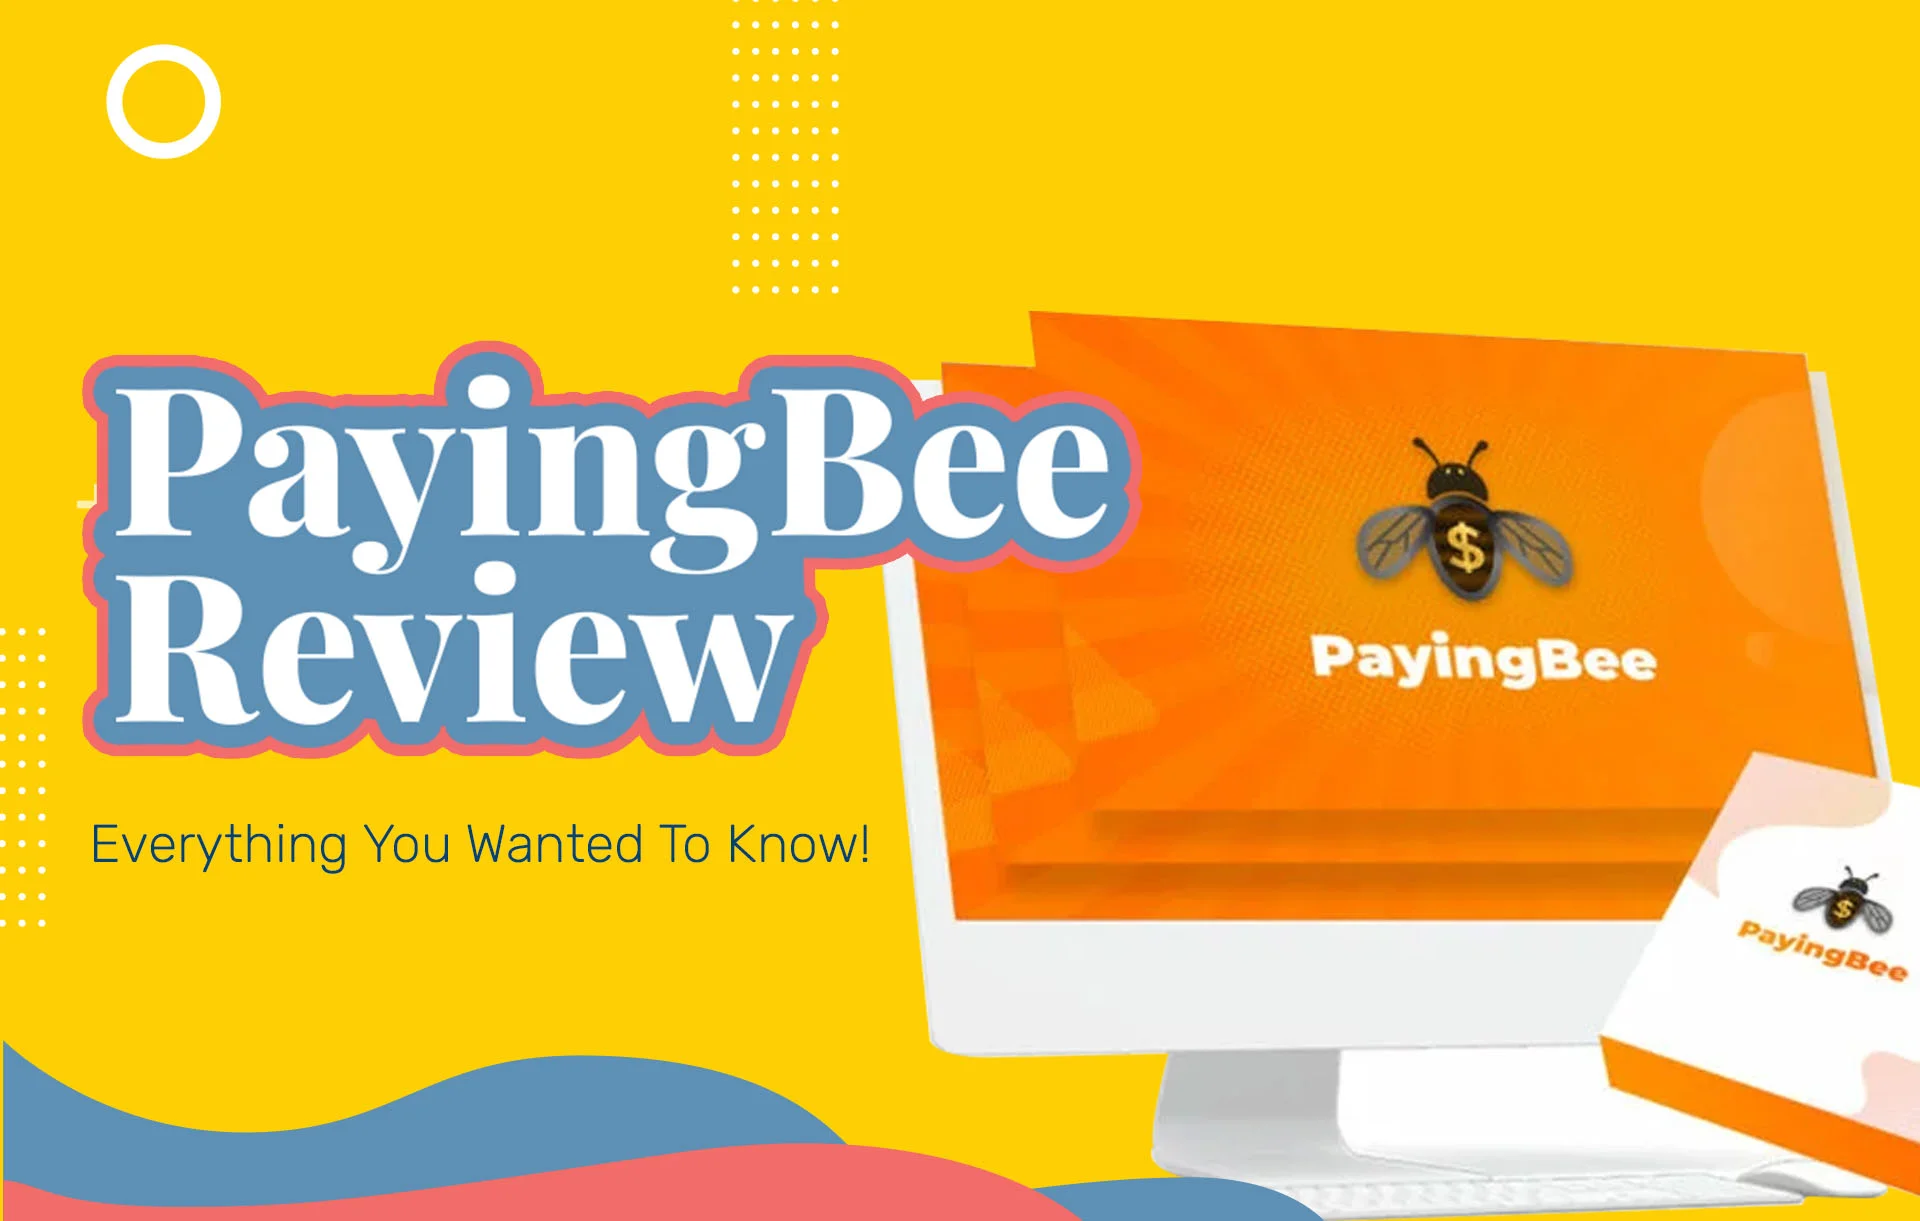 PayingBee Reviews: Best Business Course?